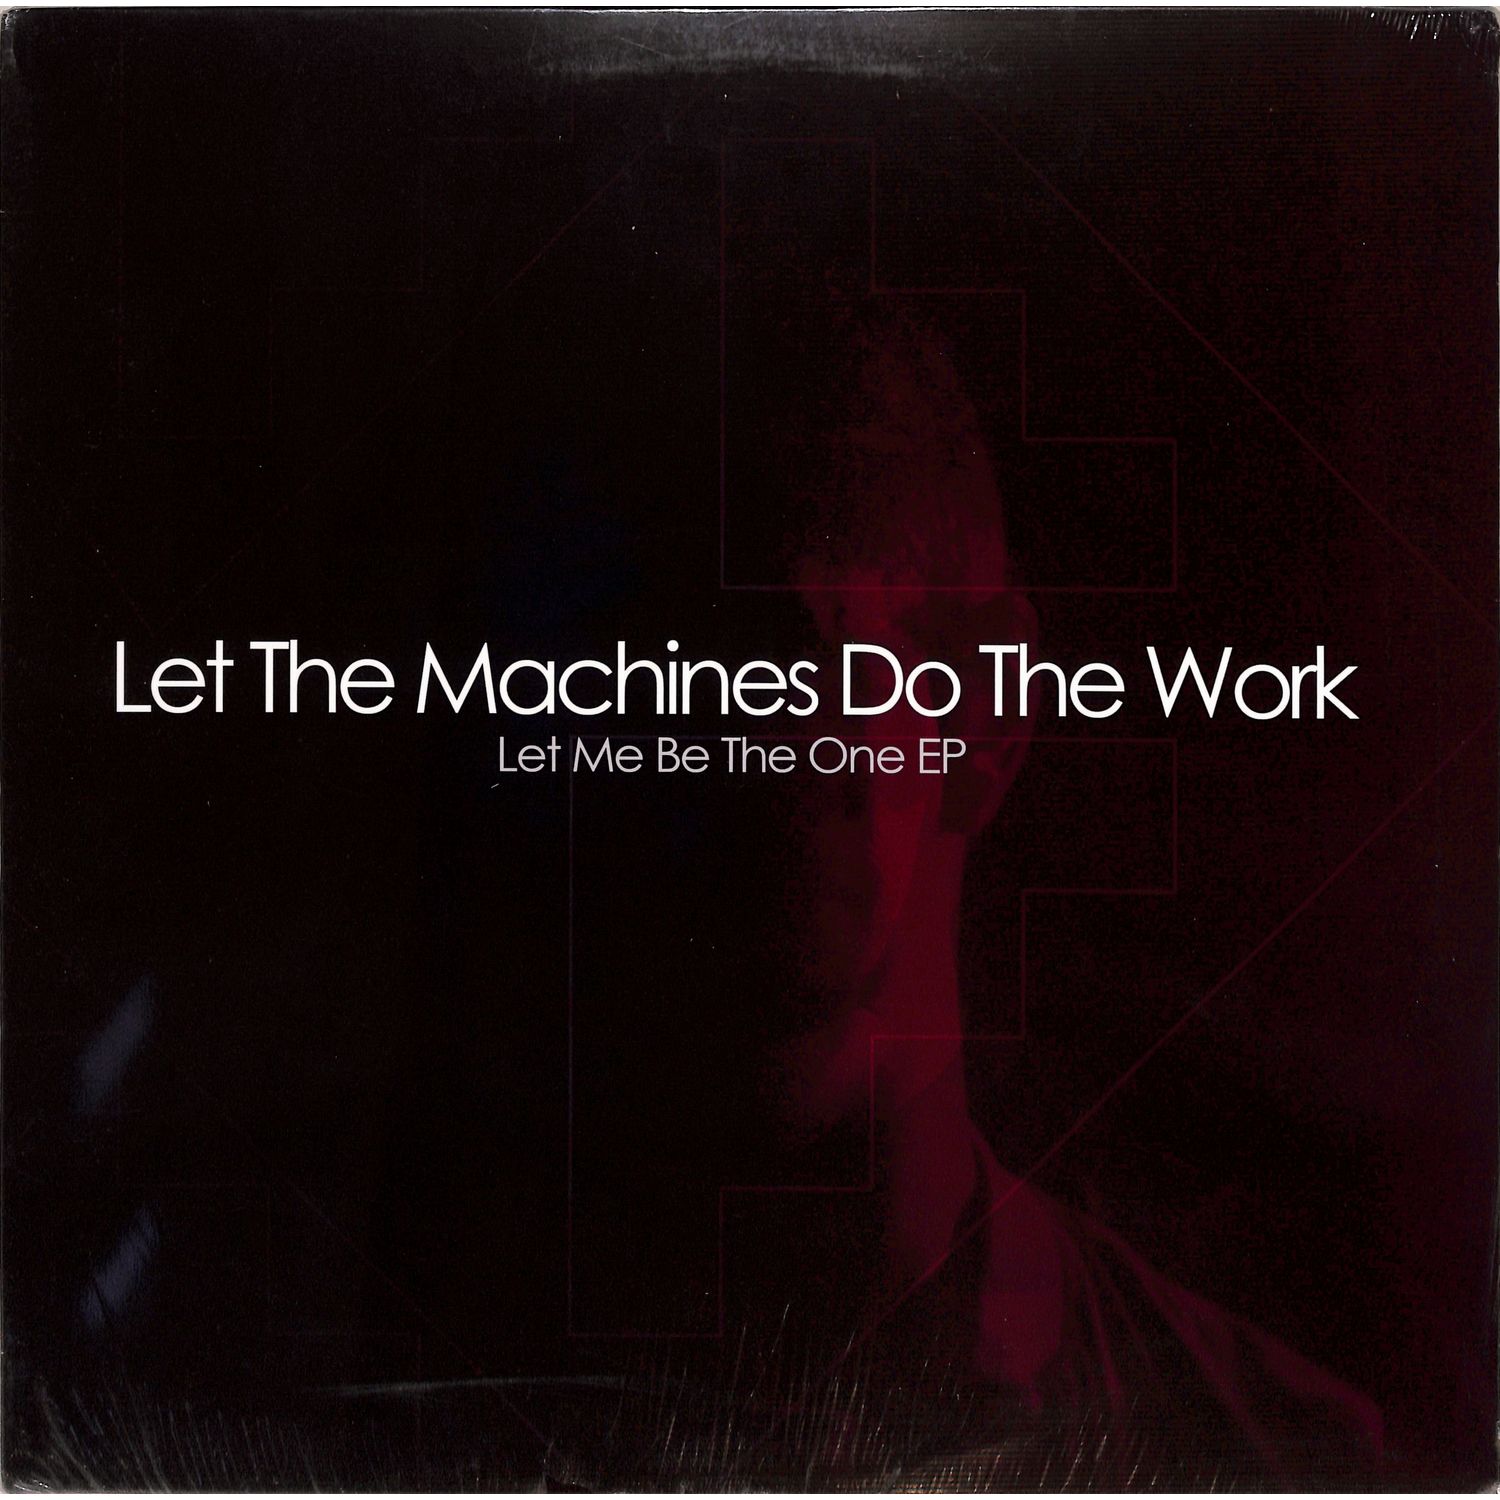 Let The Machines Do The Work - LET ME BE THE ONE EP